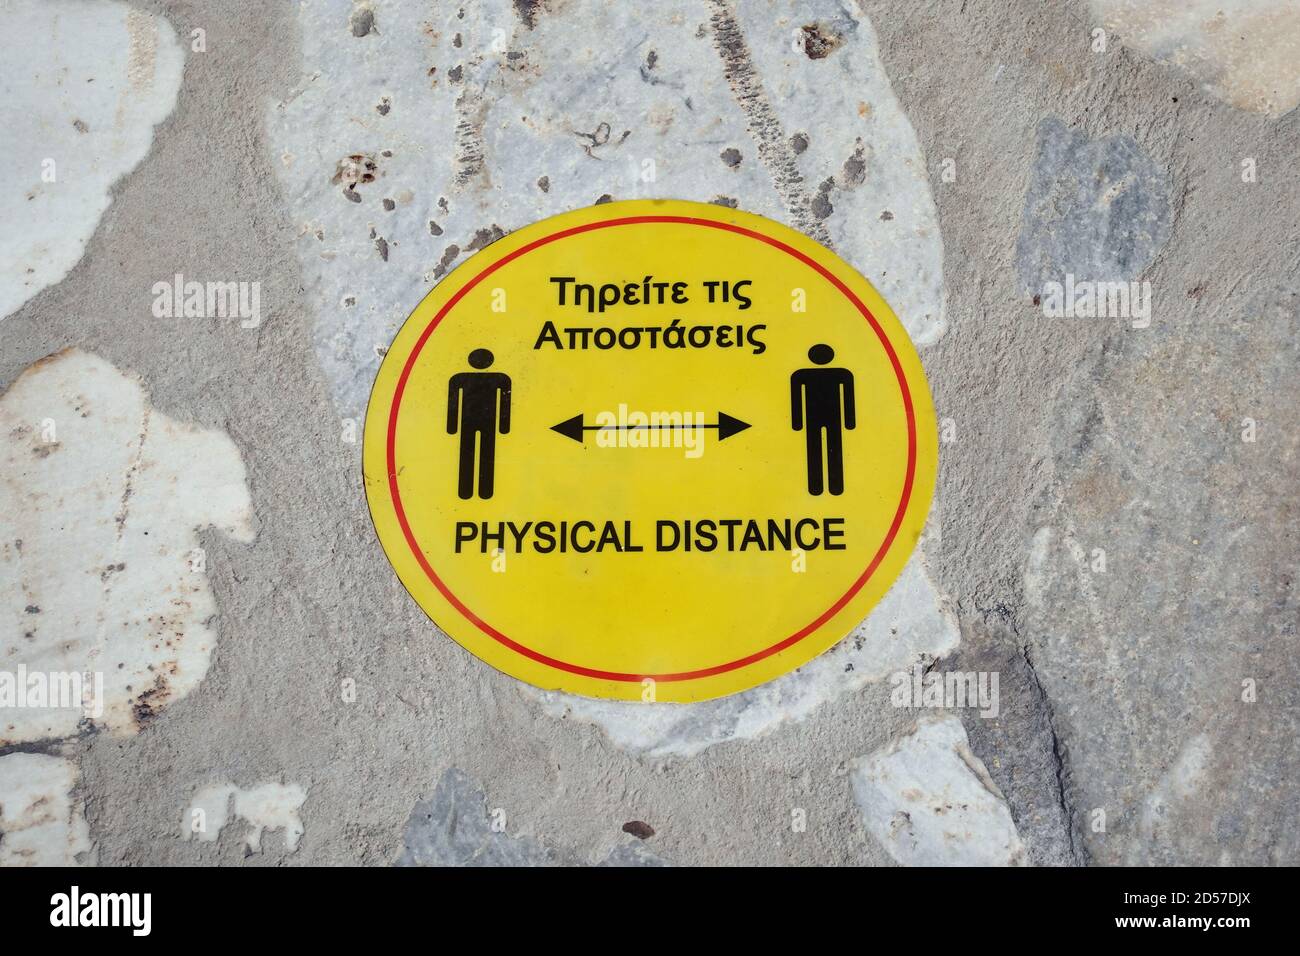 Social distancing floor sign in Greek and English text. Safety measures during the coronavirus pandemic. Stock Photo